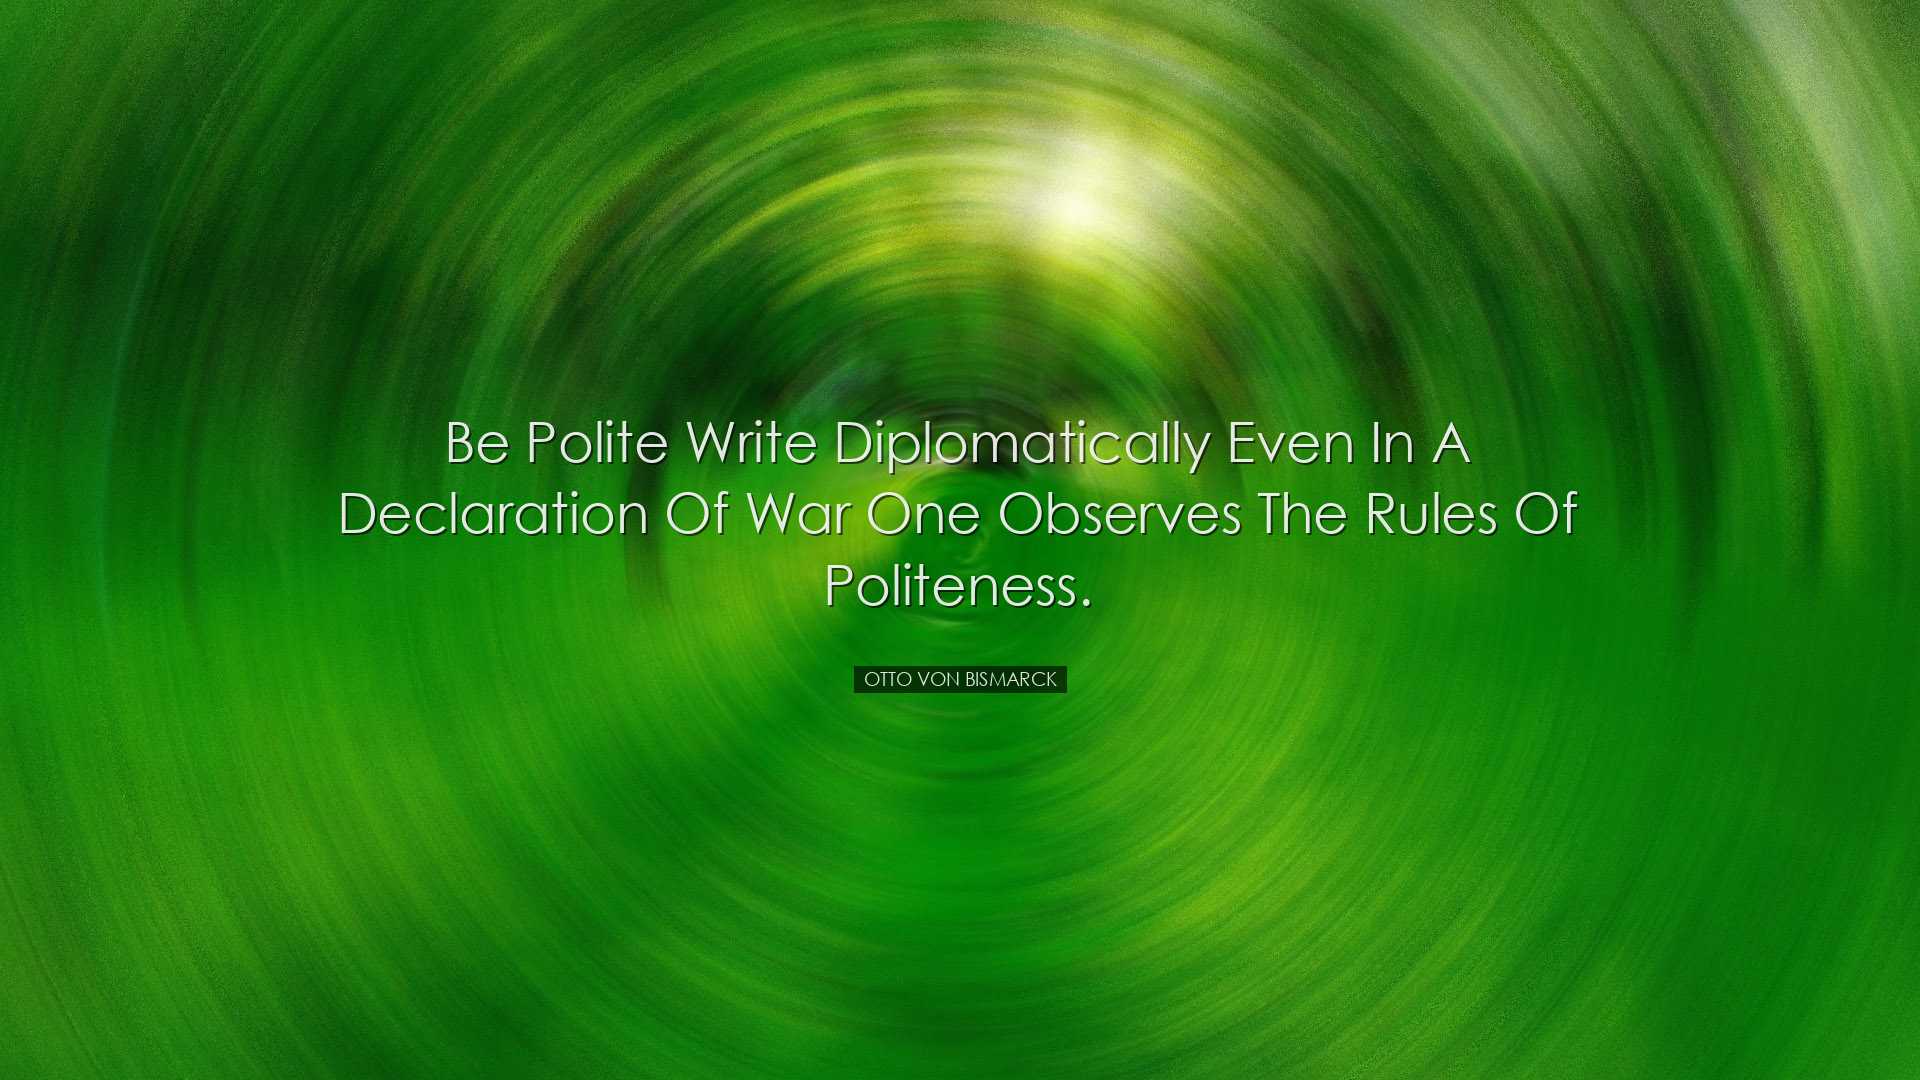 Be polite write diplomatically even in a declaration of war one ob